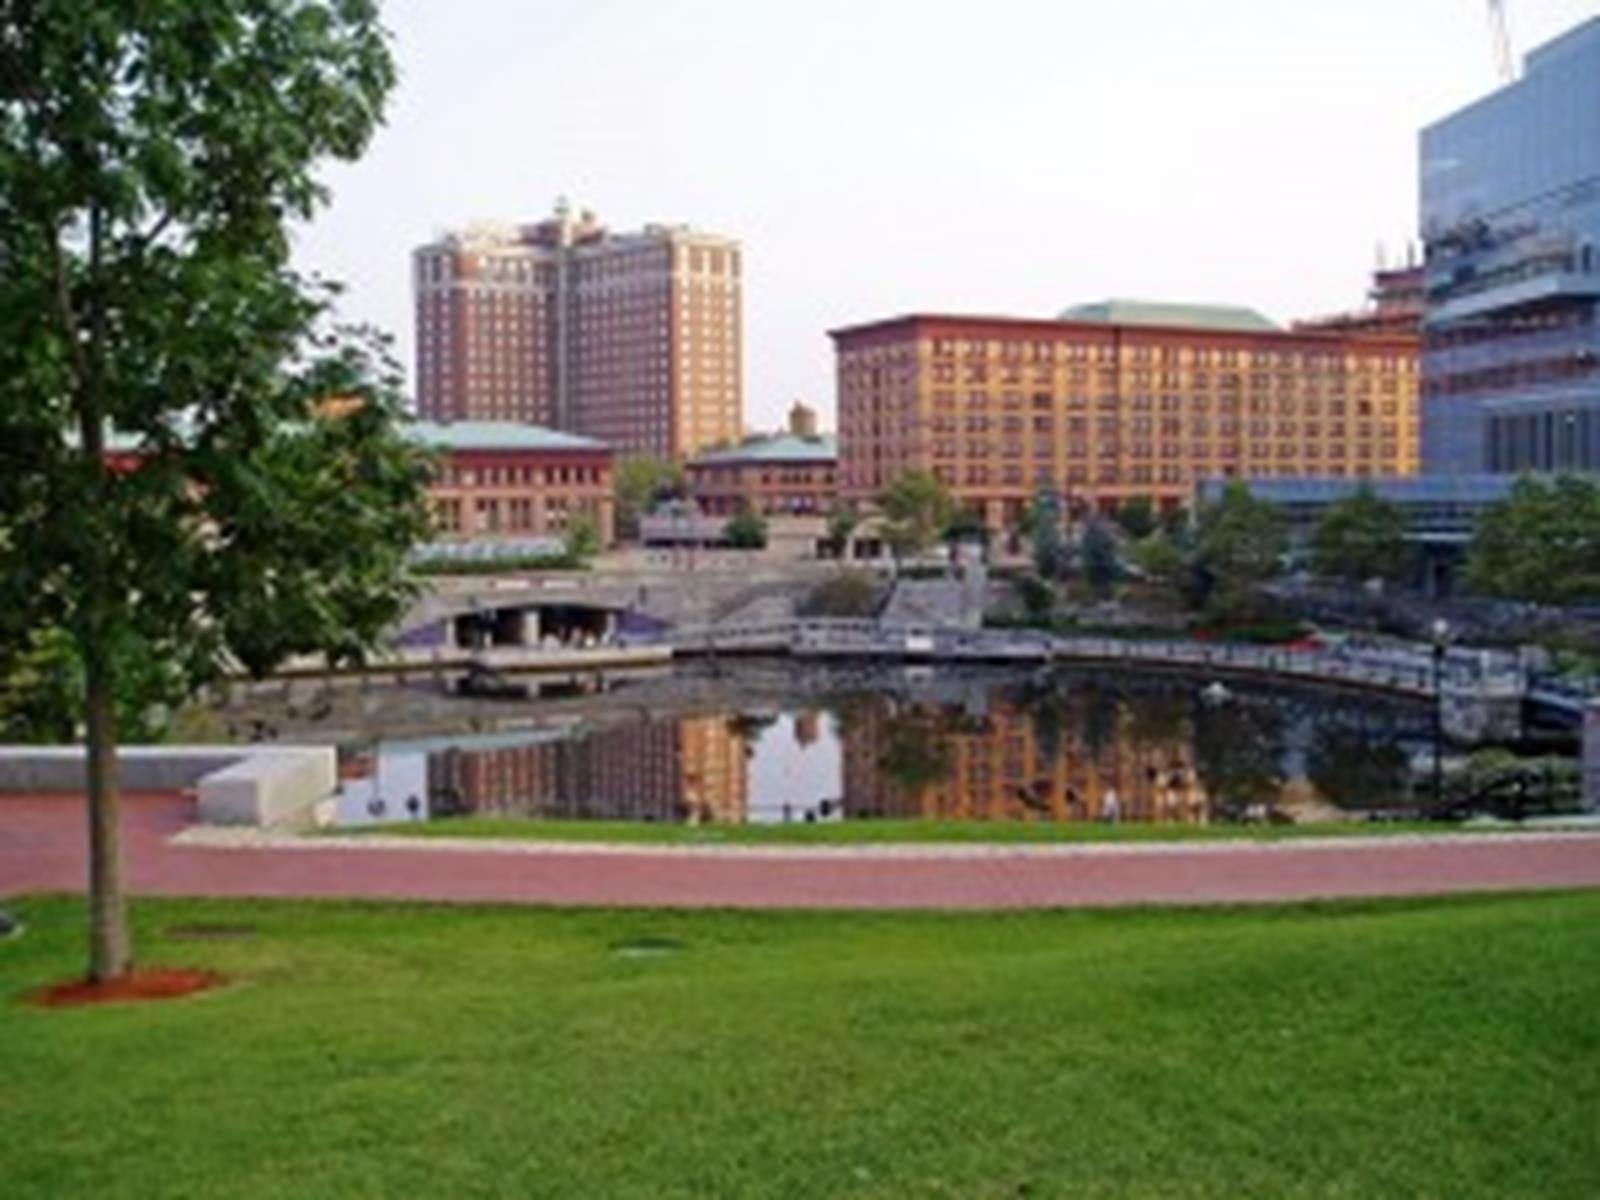 WaterPlace Park